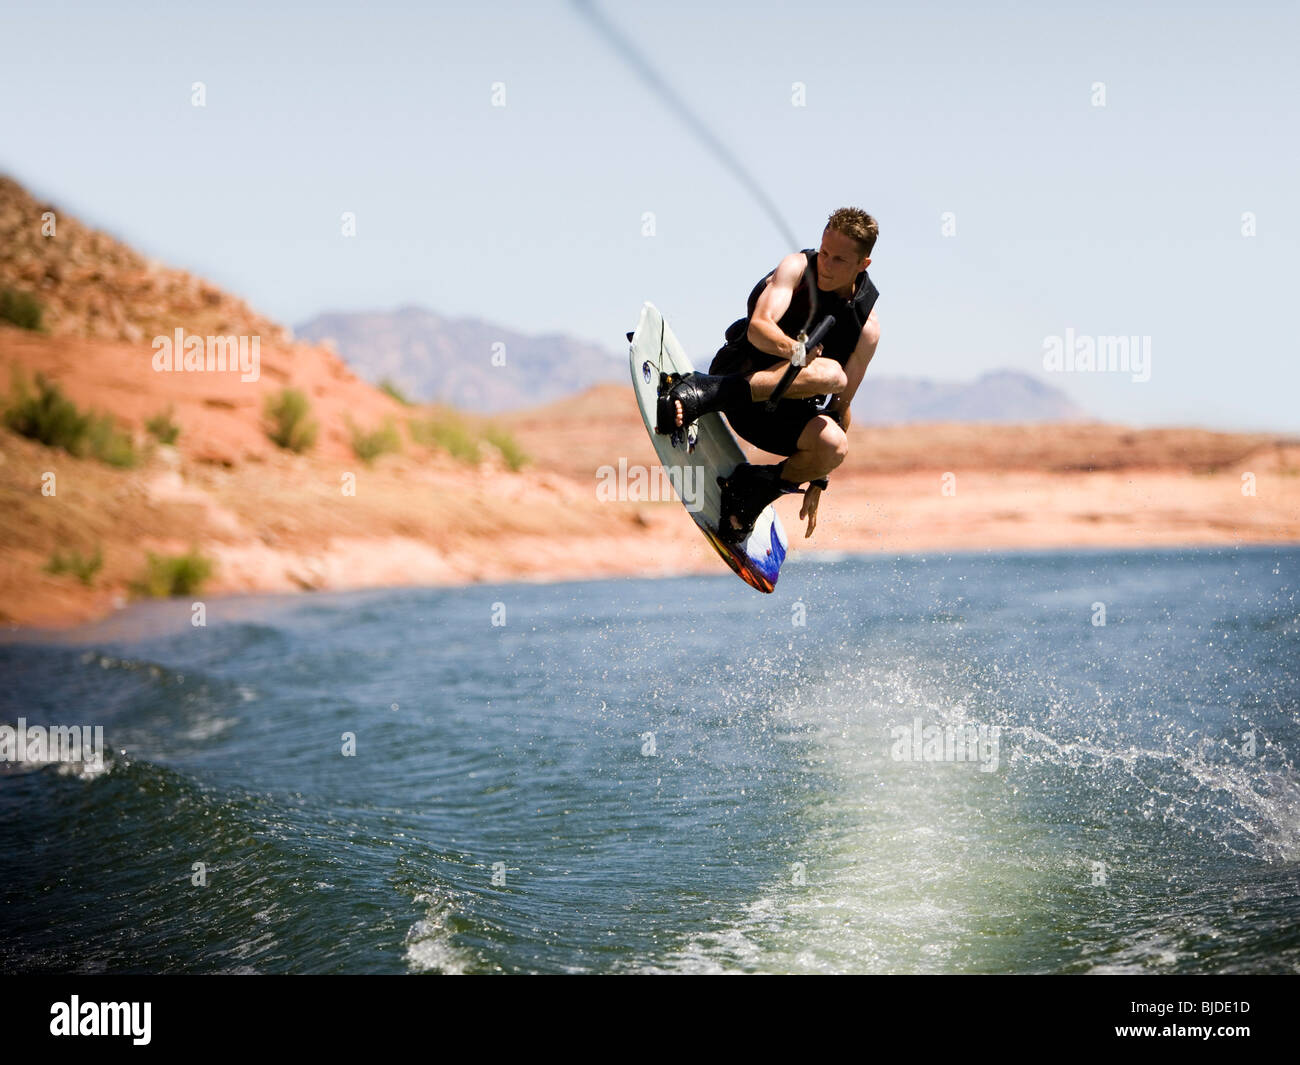 Man on a wakeboard. Stock Photo